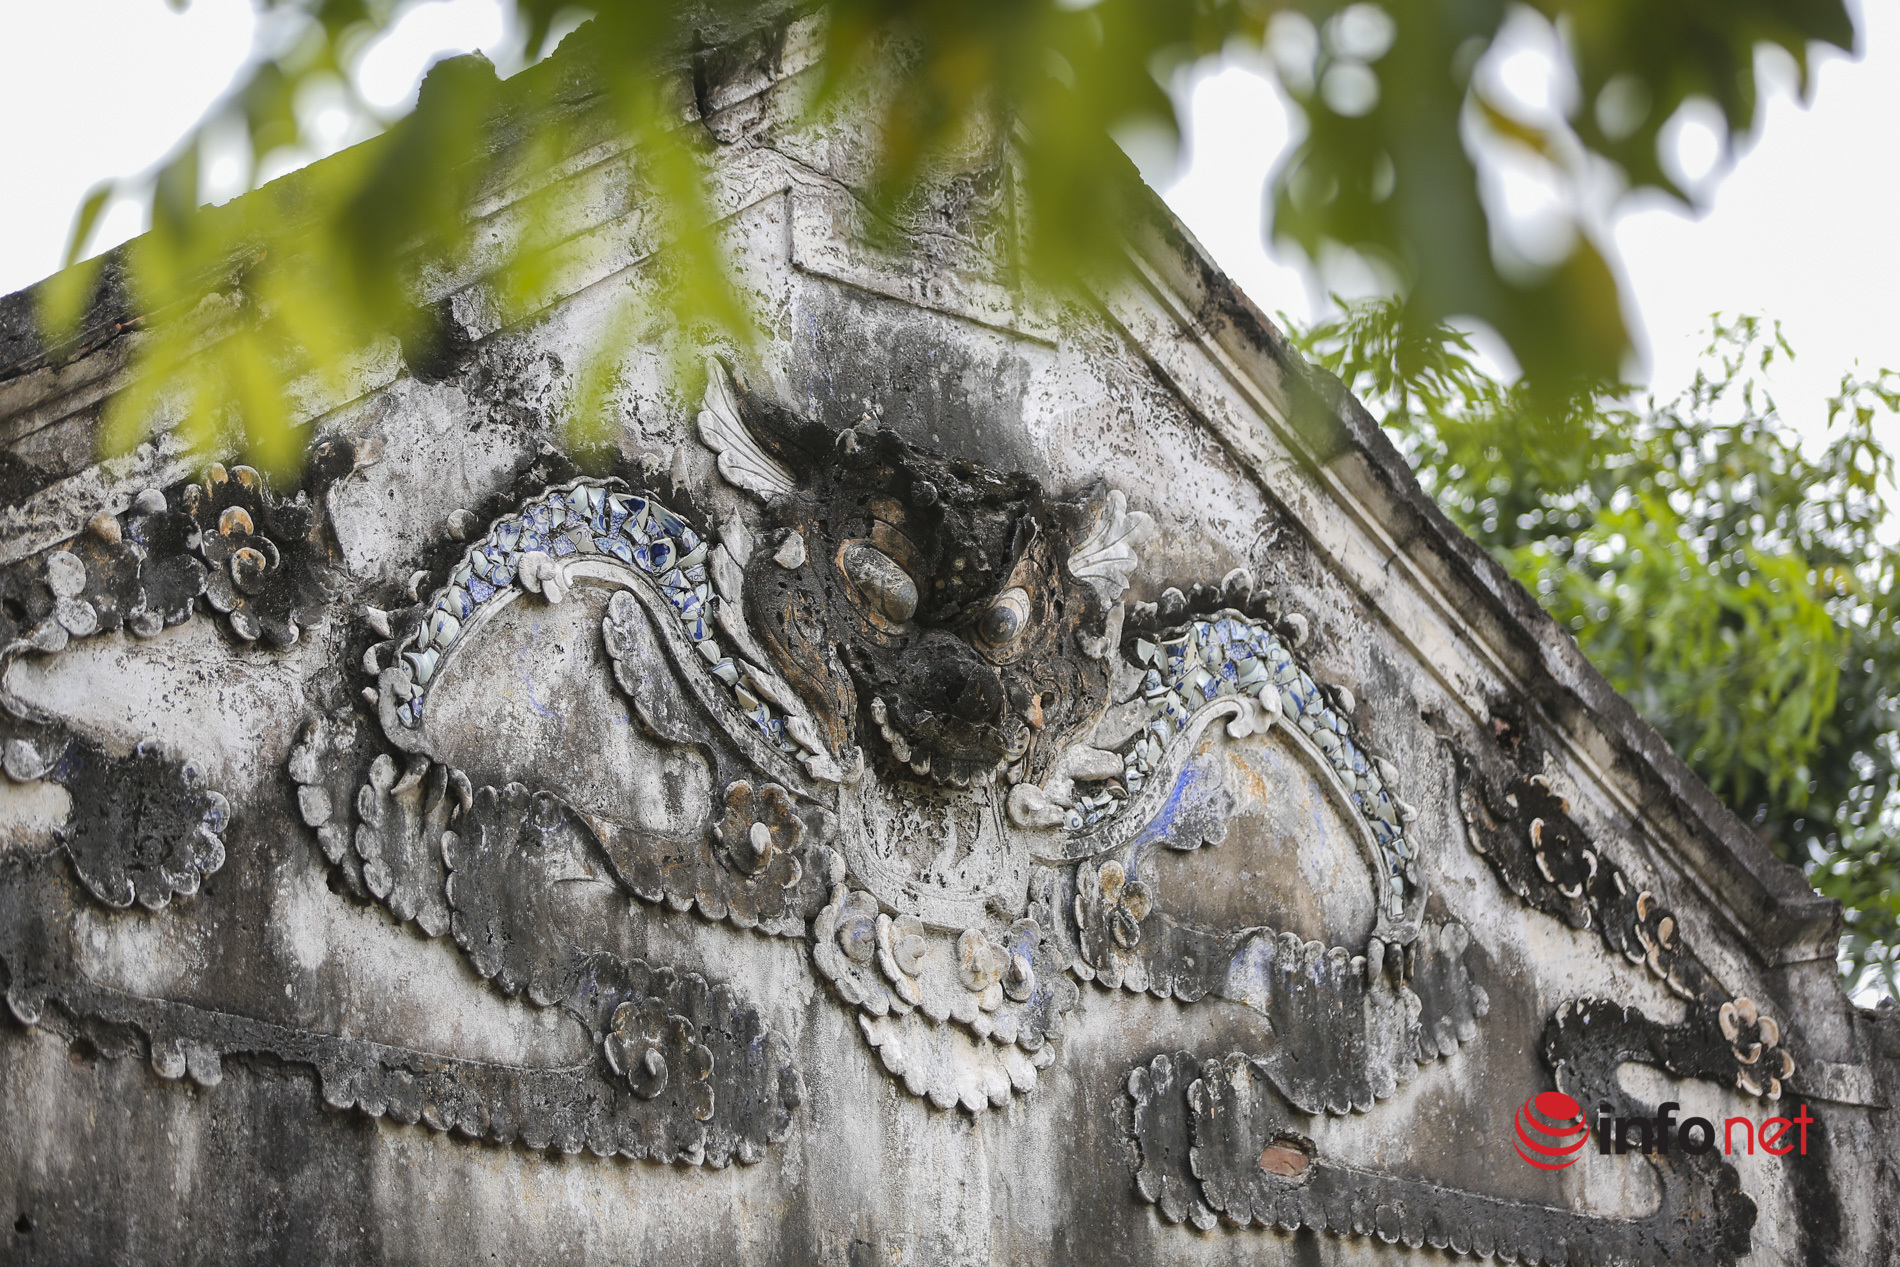 The 700-year-old ancient pagoda on the outskirts of Hanoi is in danger of collapsing